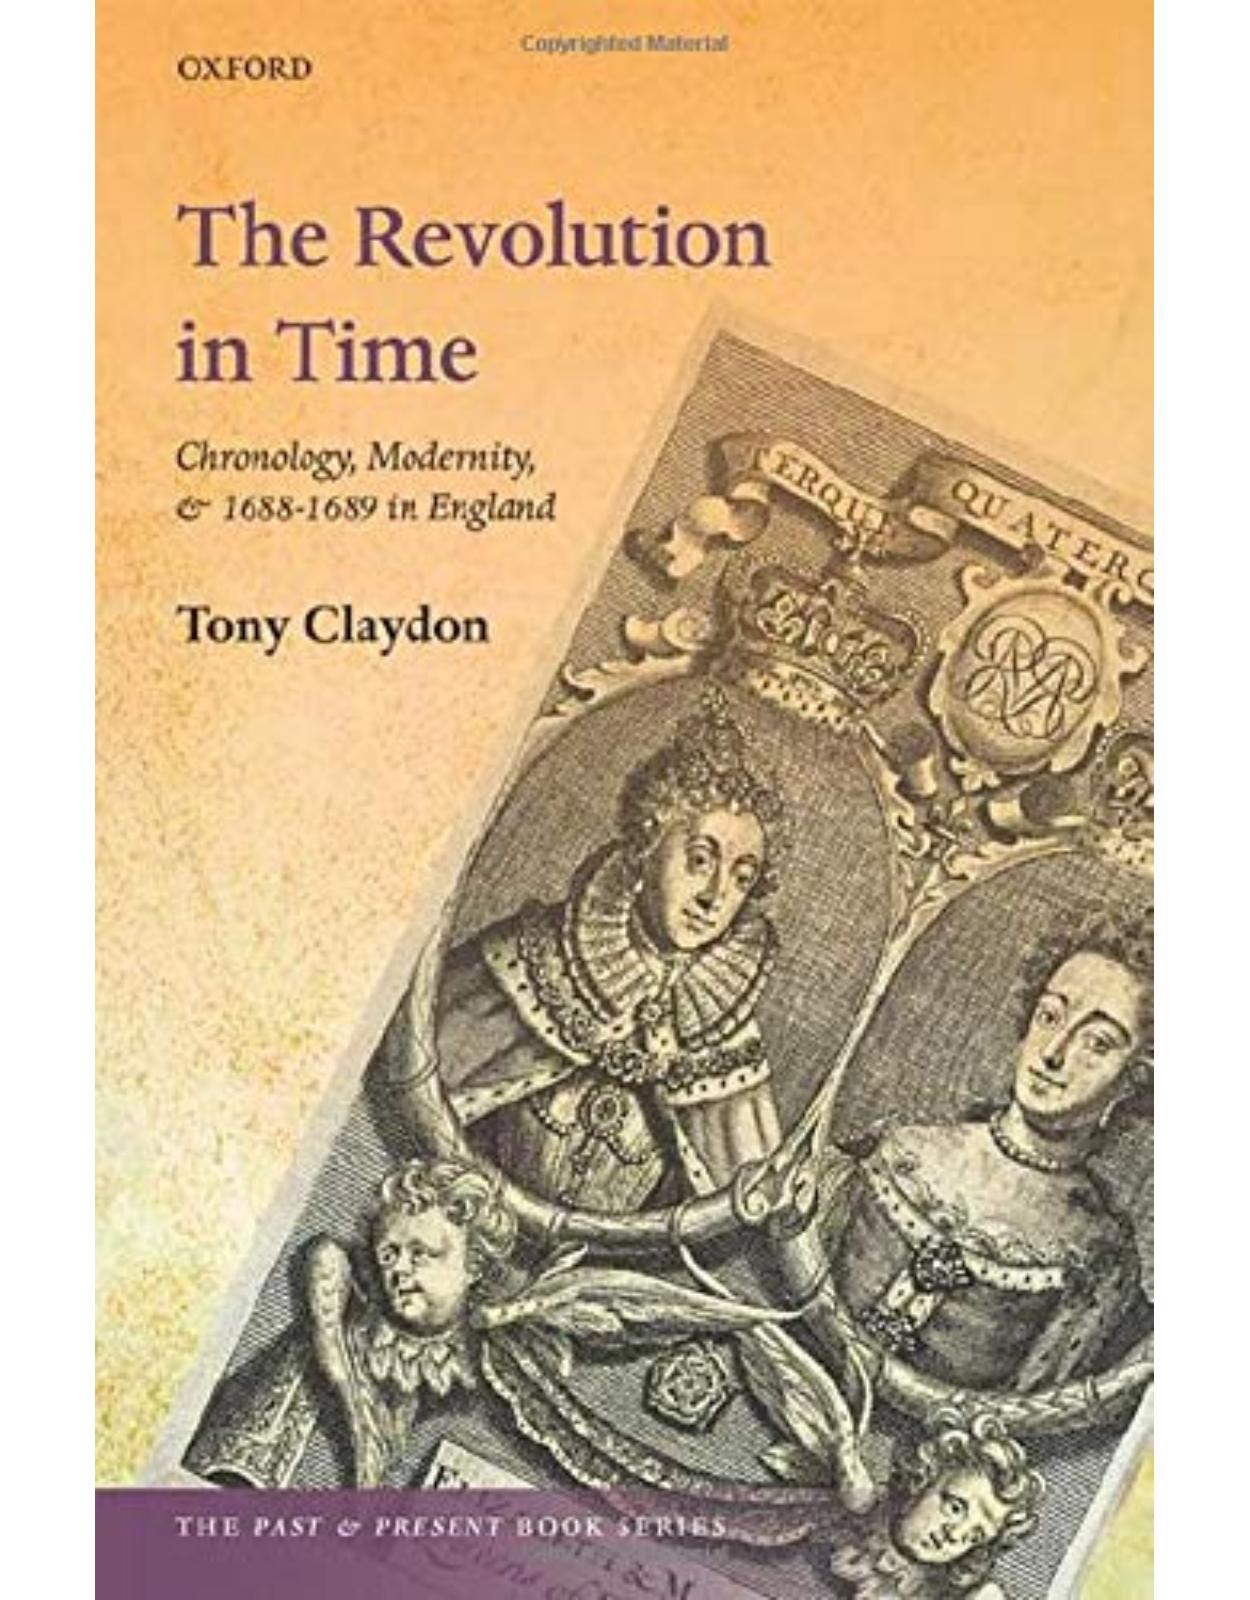 The Revolution in Time